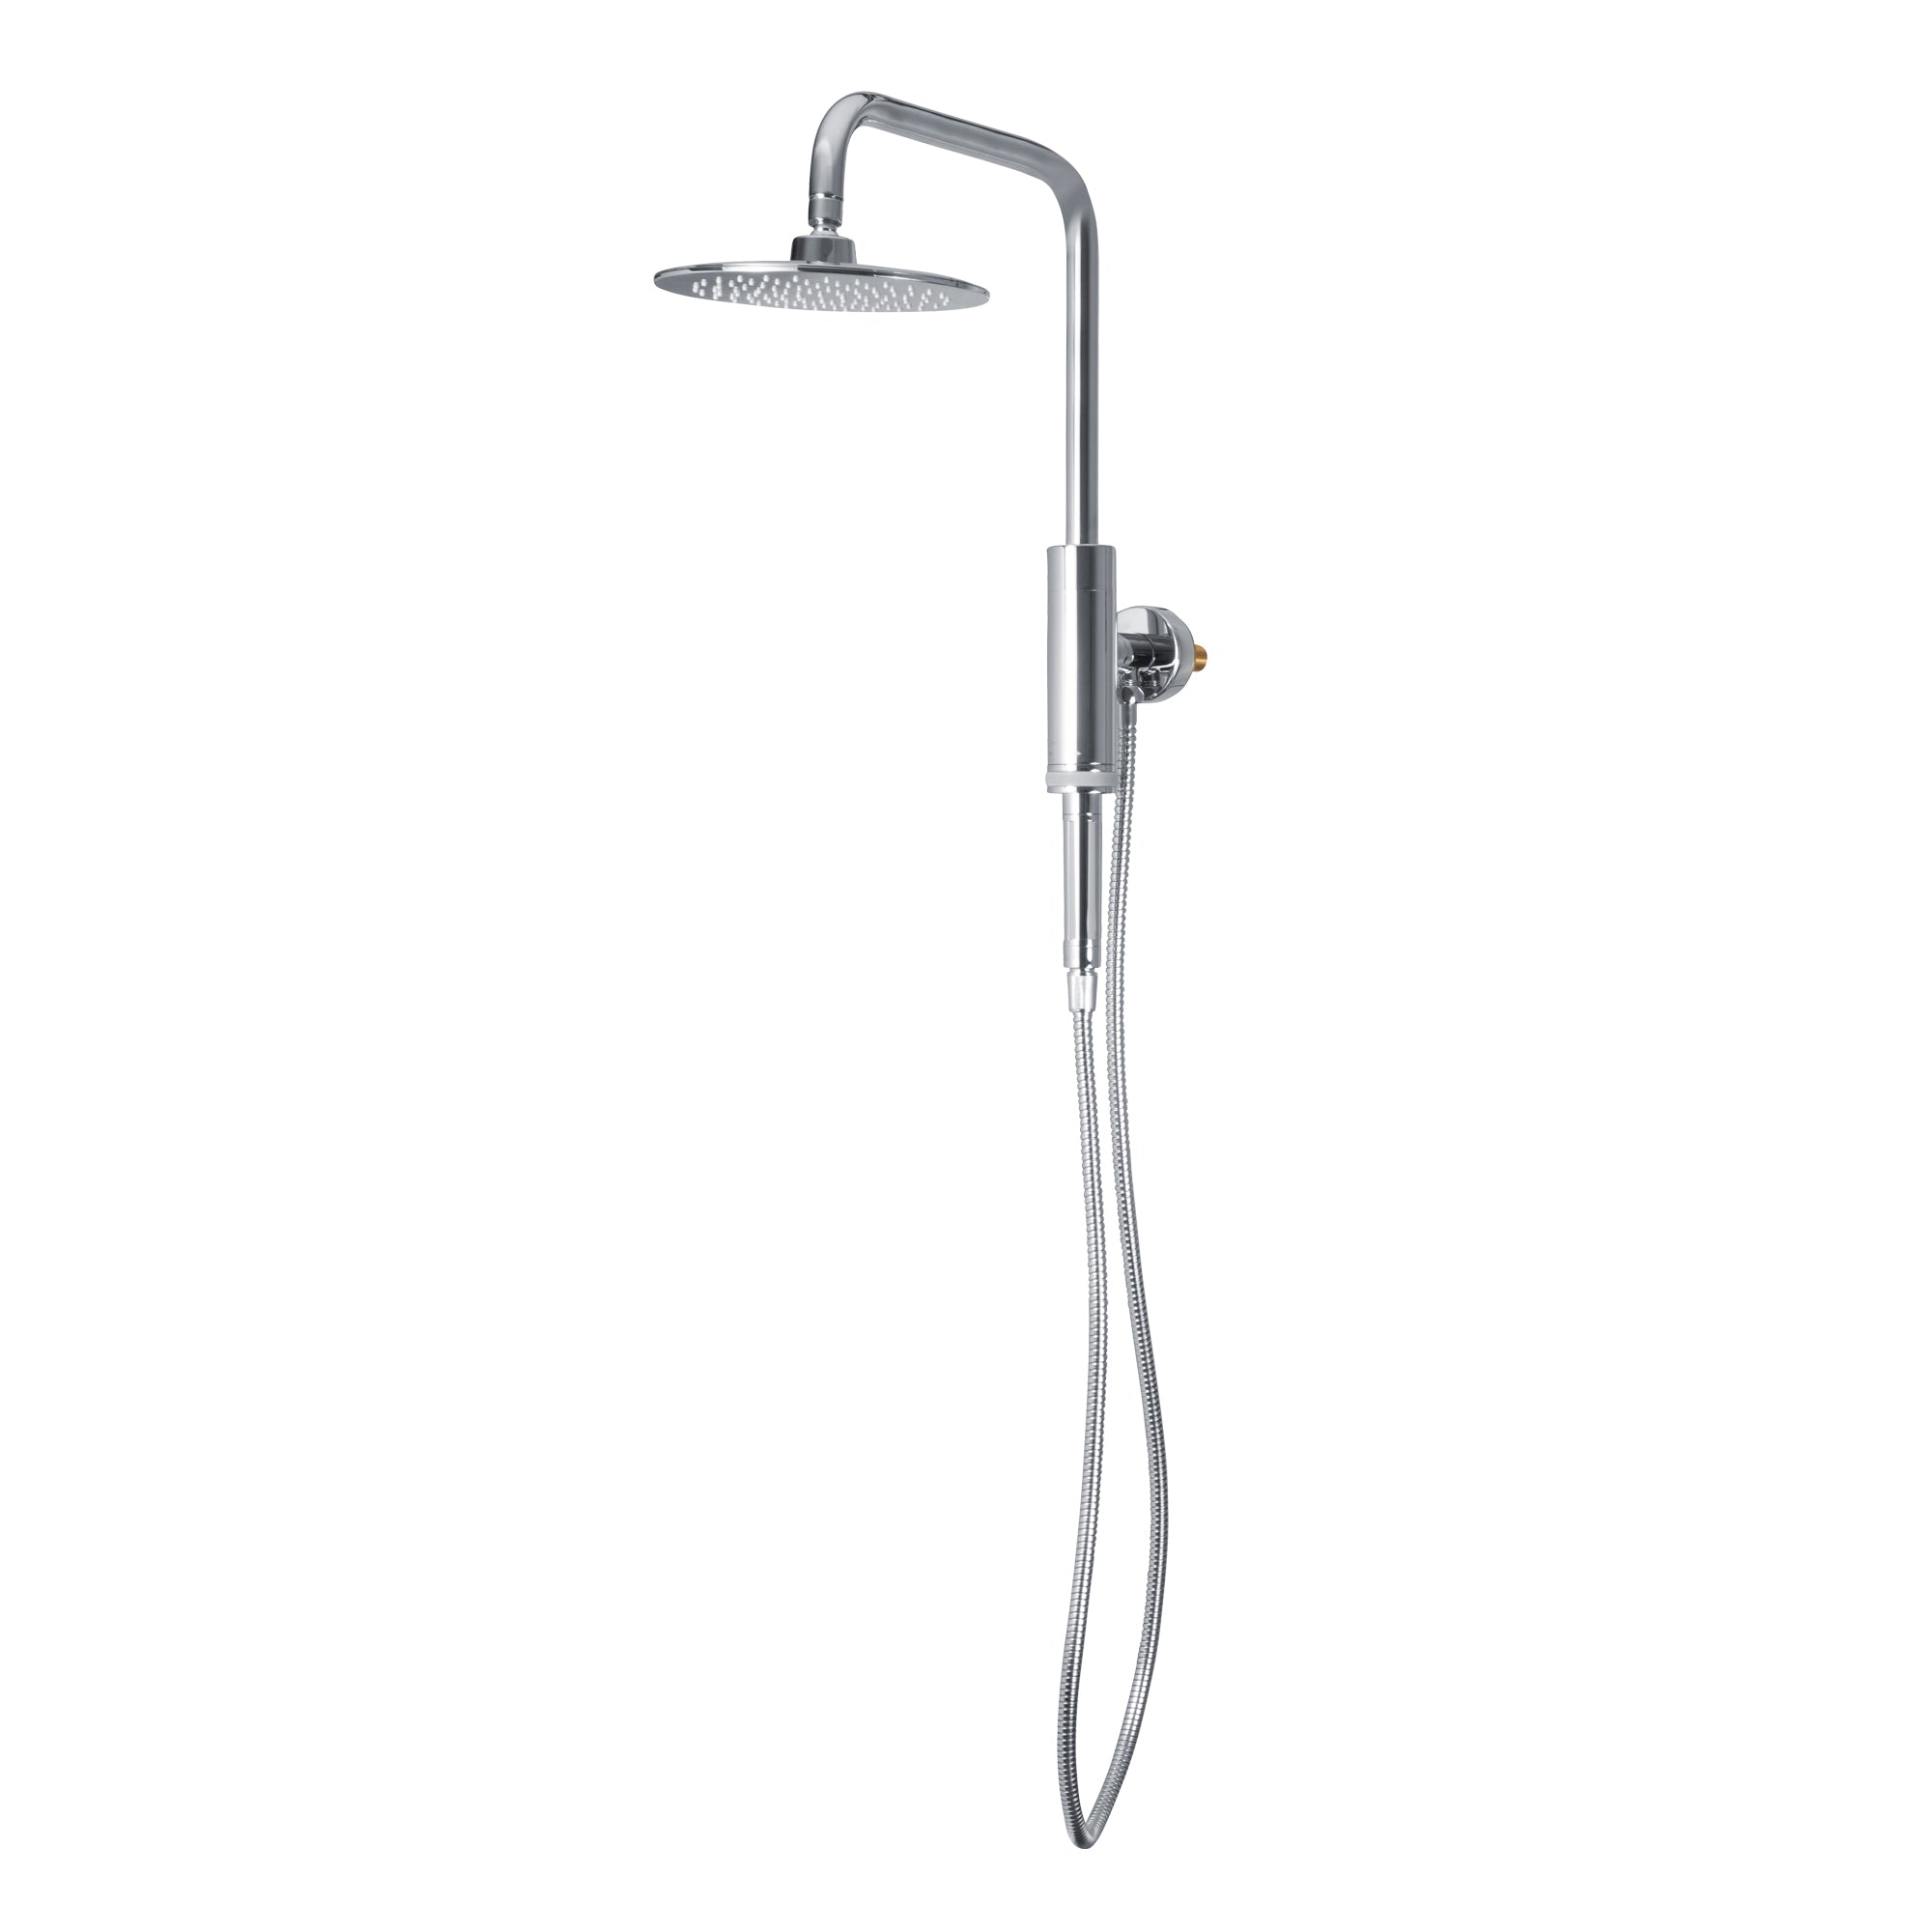 PULSE ShowerSpas Shower System - Aquarius Shower System - All brass construction in Chrome finish - with 8" Rain showerhead with soft tips, hand shower with 59" double-interlocking stainless steel hose and Magnetic hand shower holder - 1052 - Vital Hydrotherapy